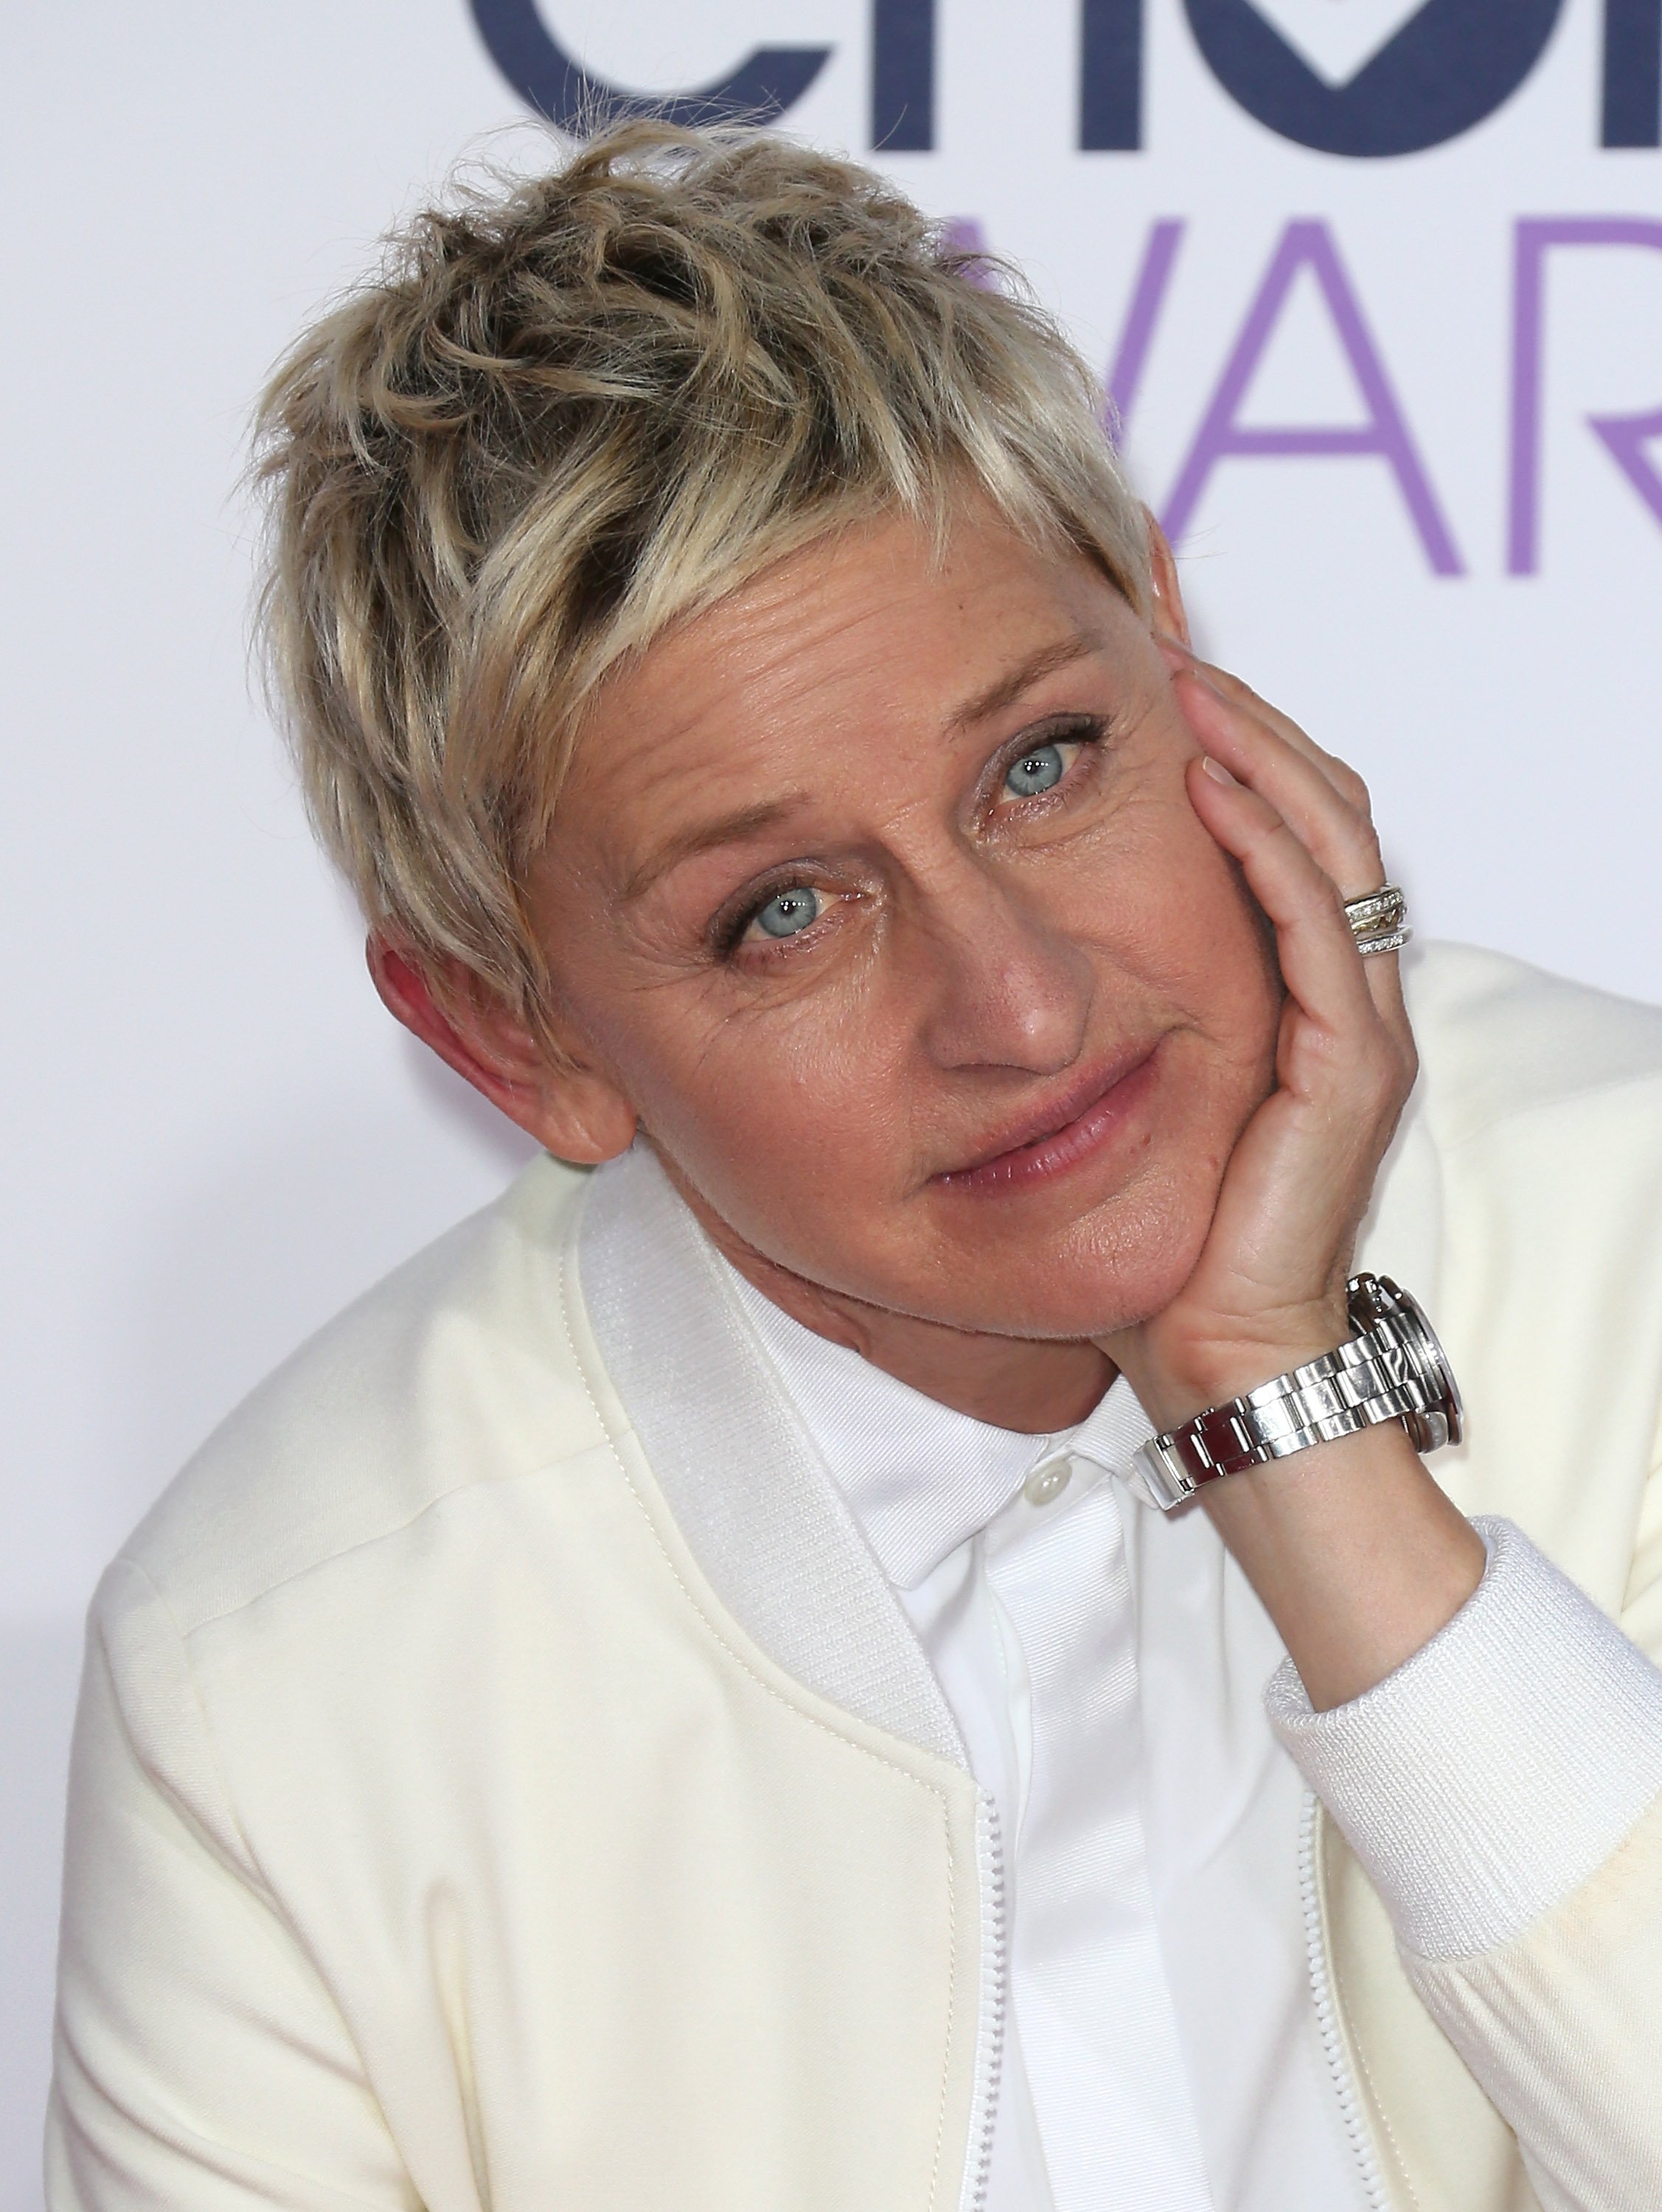 Ellen DeGeneres attends the 2015 People's Choice Awards at the Nokia Theatre L.A. Live on January 7, 2015, in Los Angeles, California. I Source: Getty Images